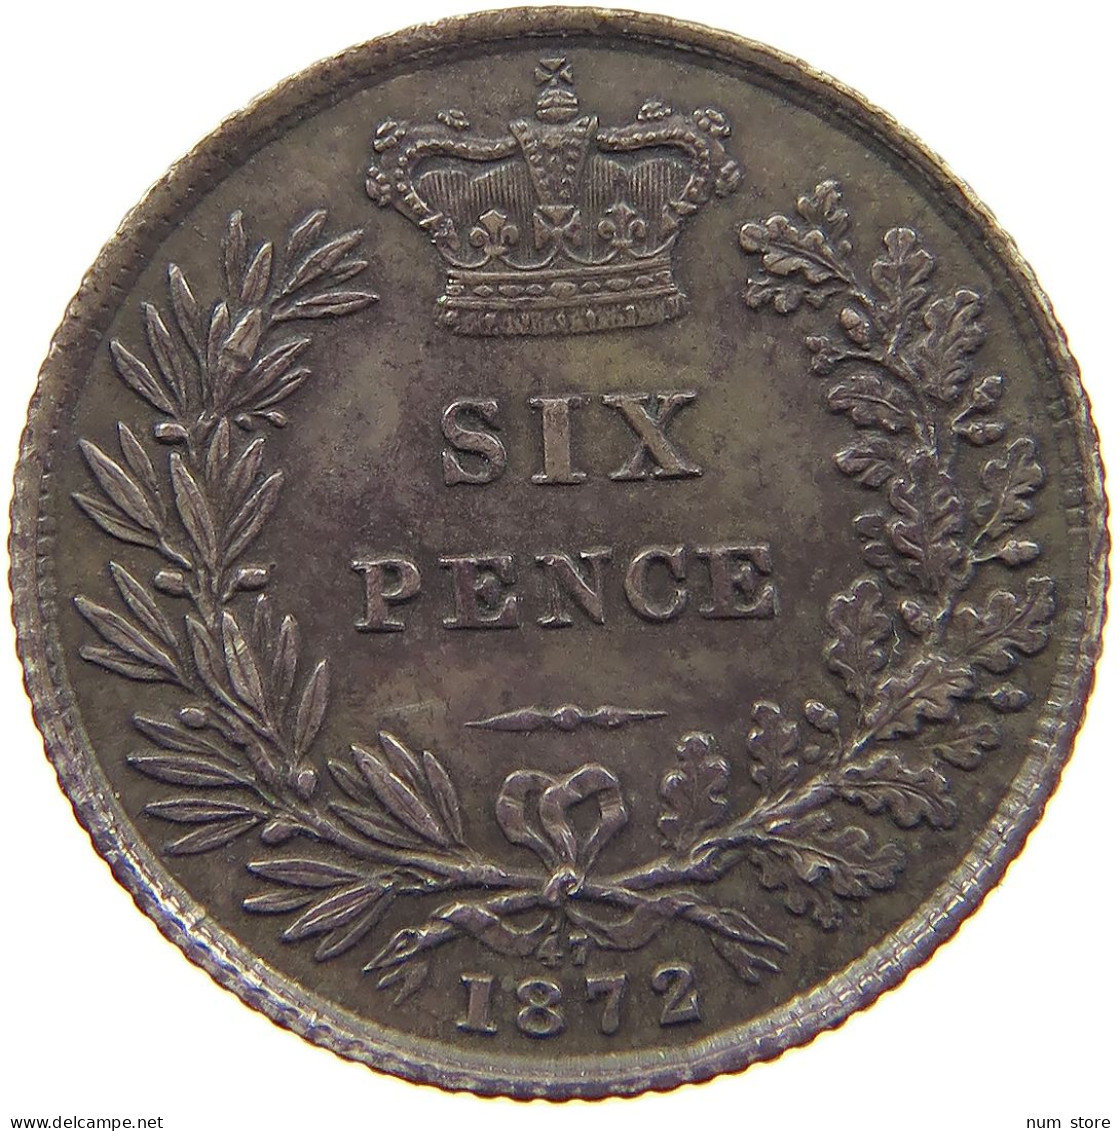 GREAT BRITAIN SIXPENCE 1872 Victoria 1837-1901 DIE 47 #t070 0307 - H. 6 Pence